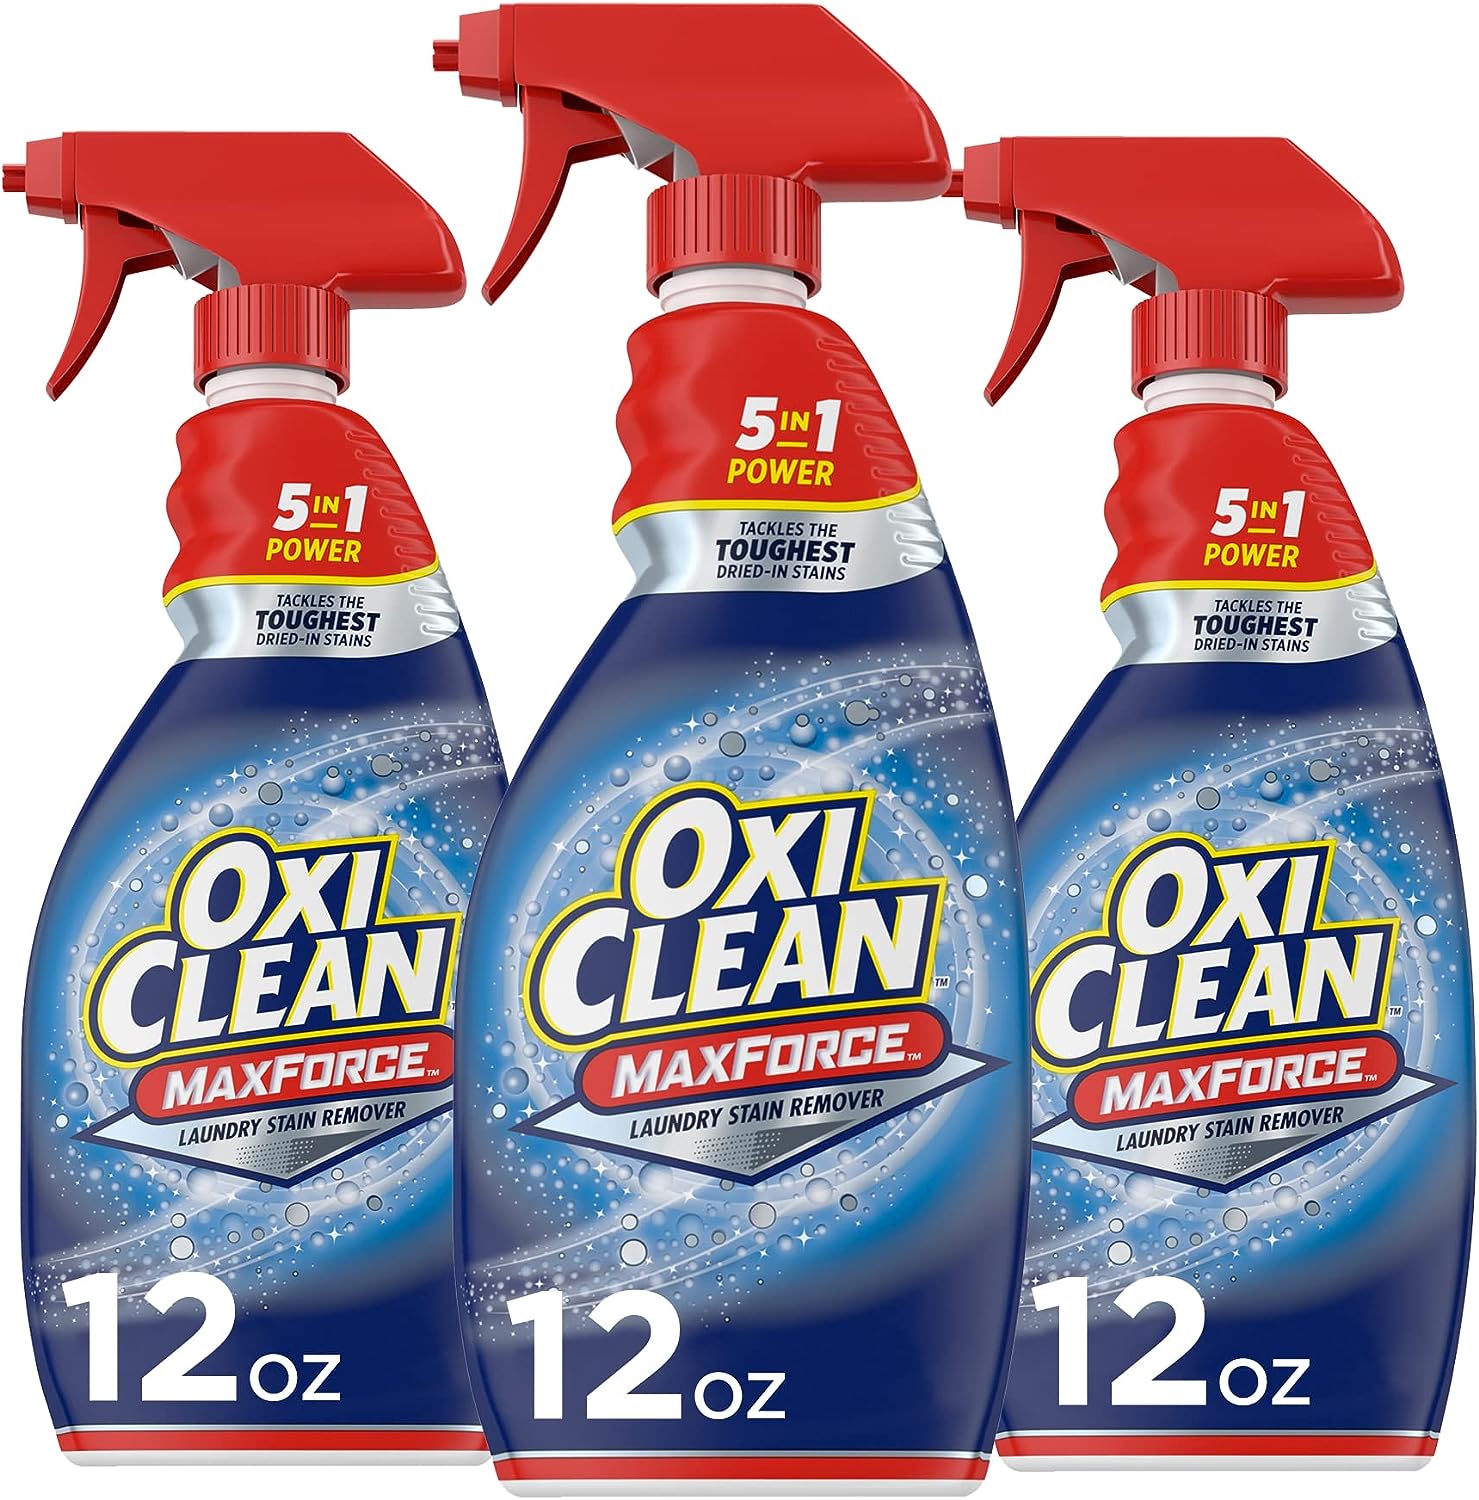 OxiClean Stain Remover Max Force - 12 FL OZ (Pack of 2) - laundry stain  remover spray, spray and wash stain remover laundry + 1 Gaudum Laundry  Stain